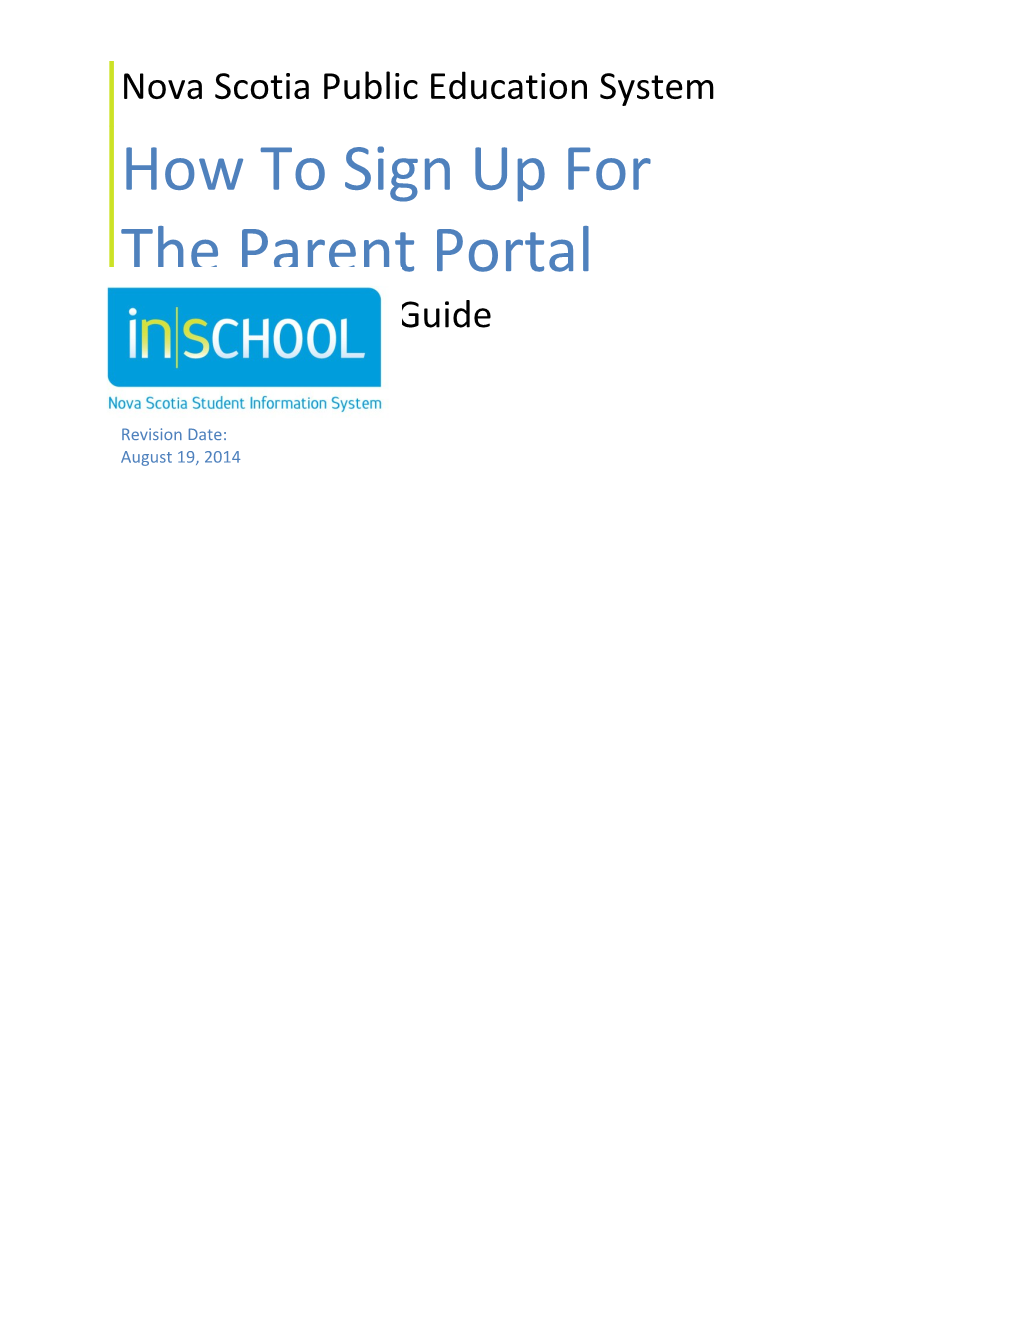 How to Sign up for the Parent Portal